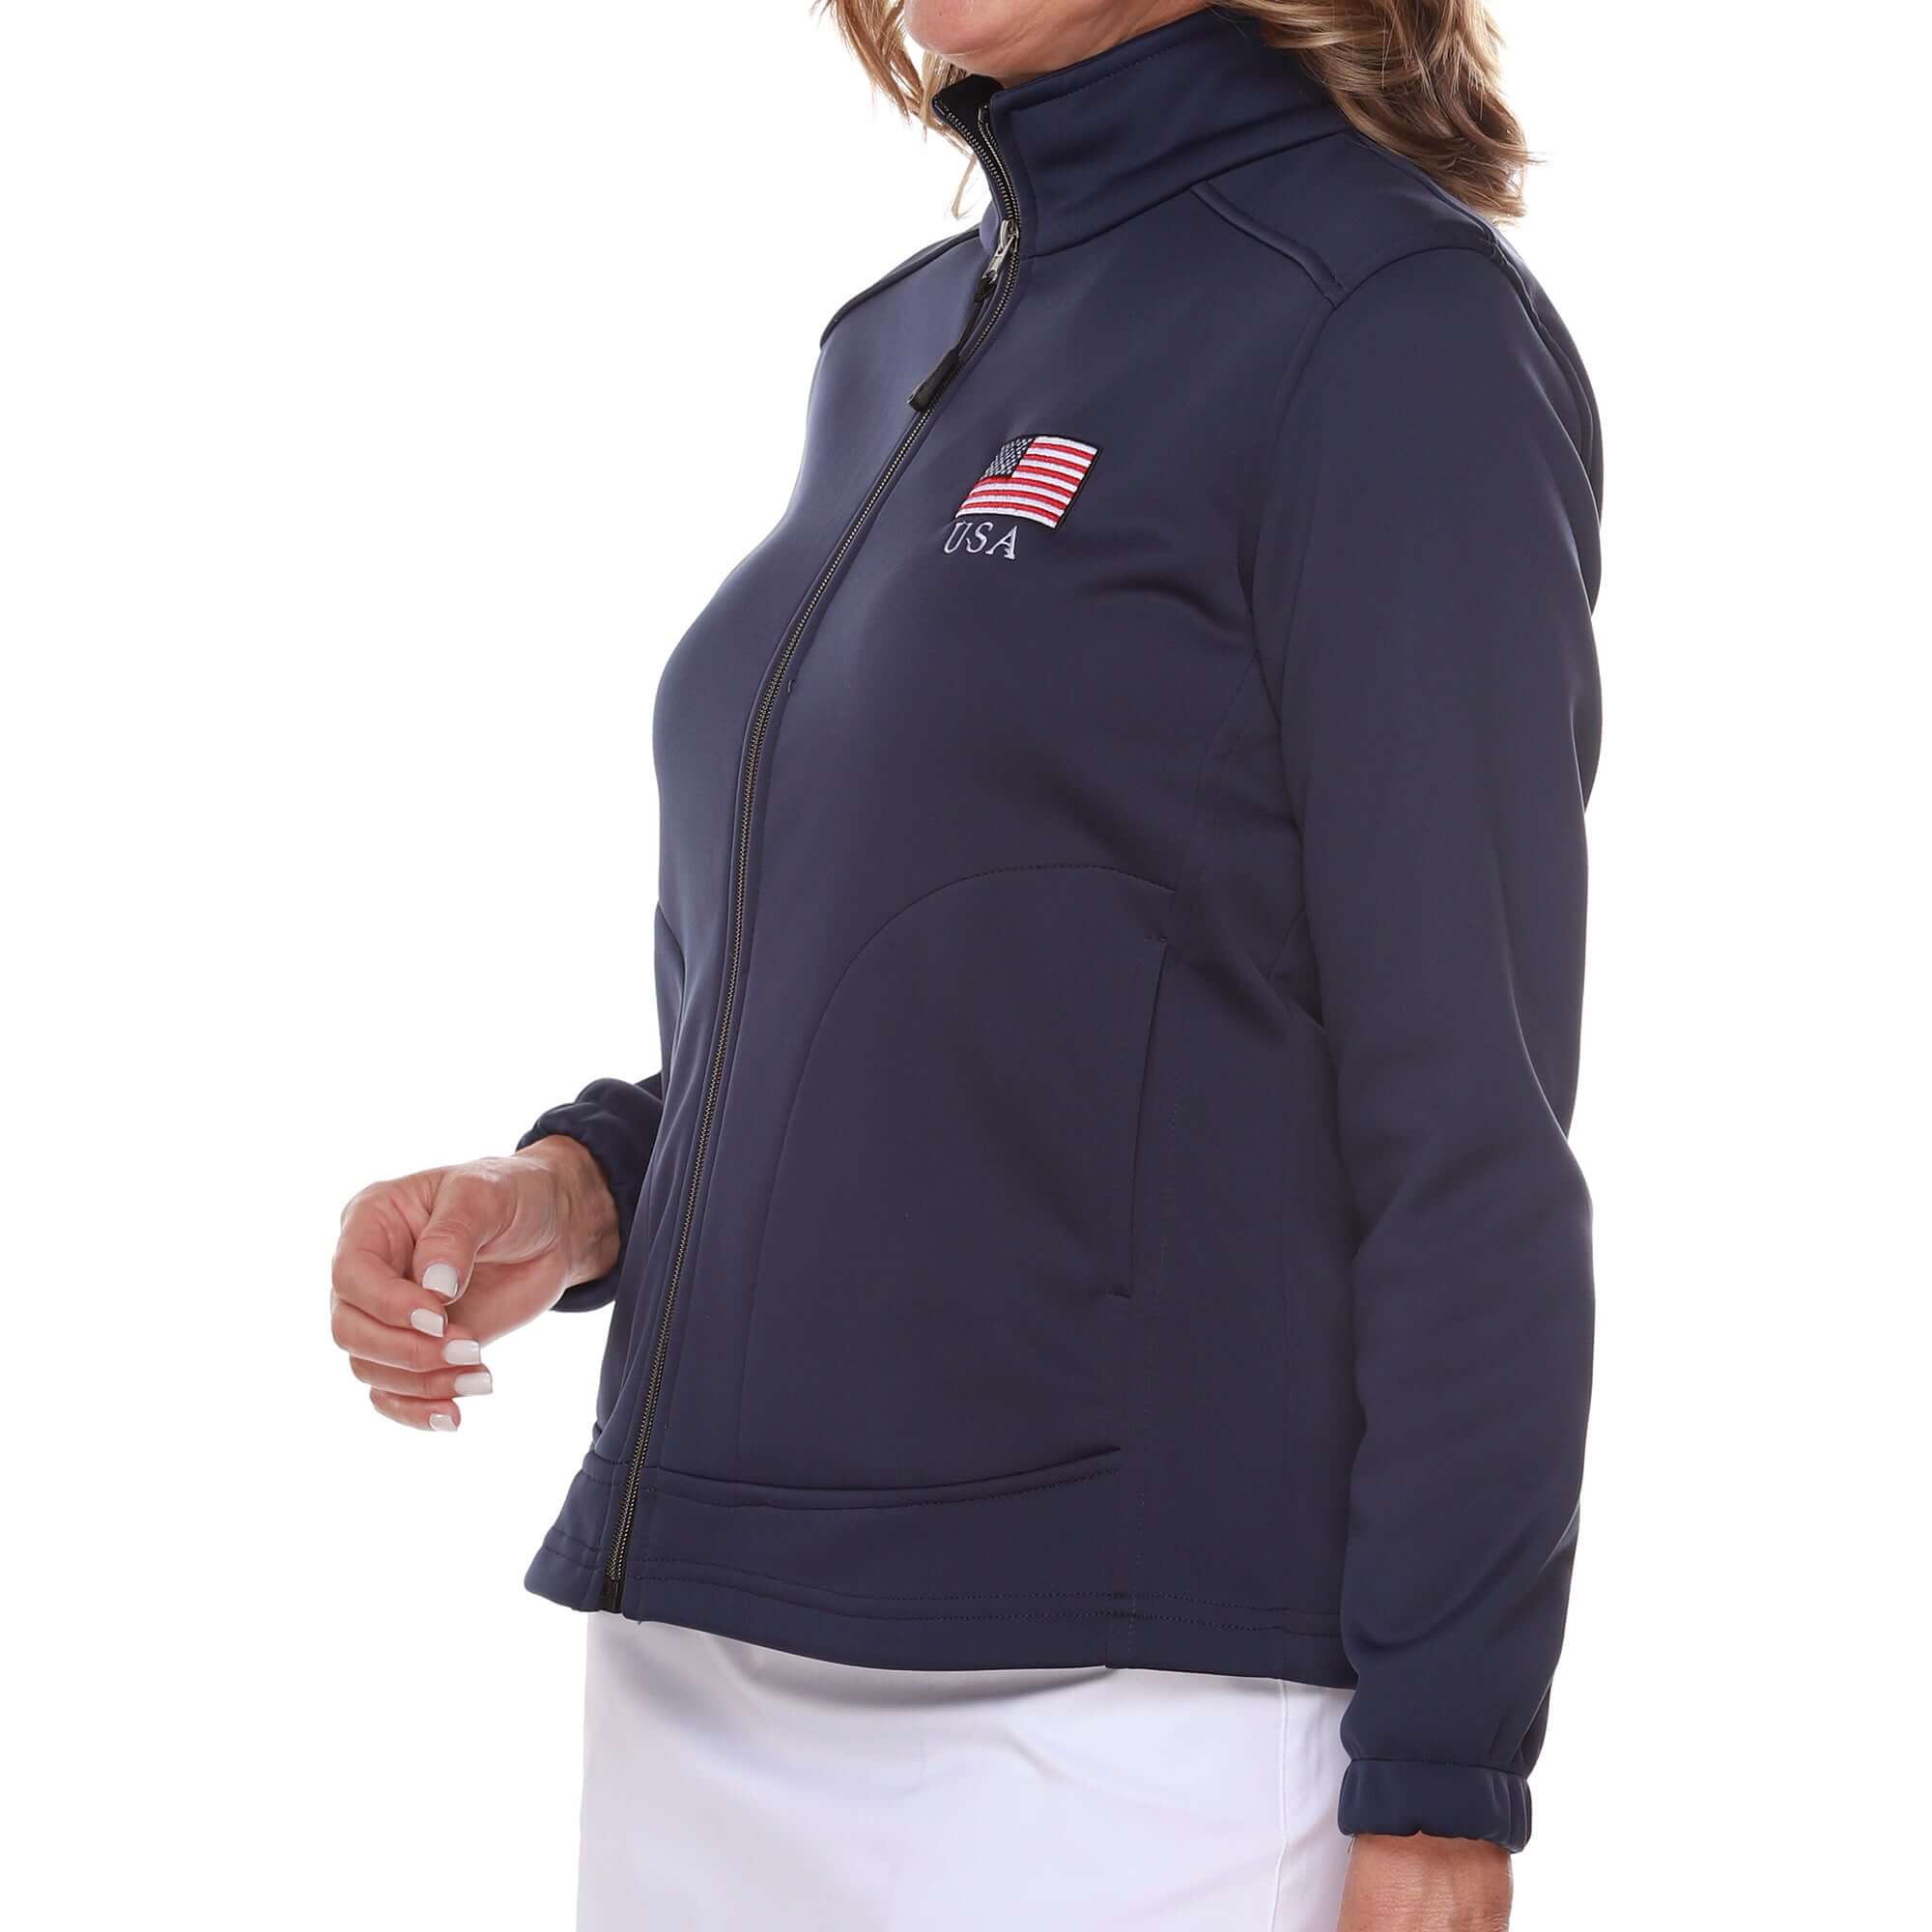 Women's Patriotic Made in USA Softshell Jacket